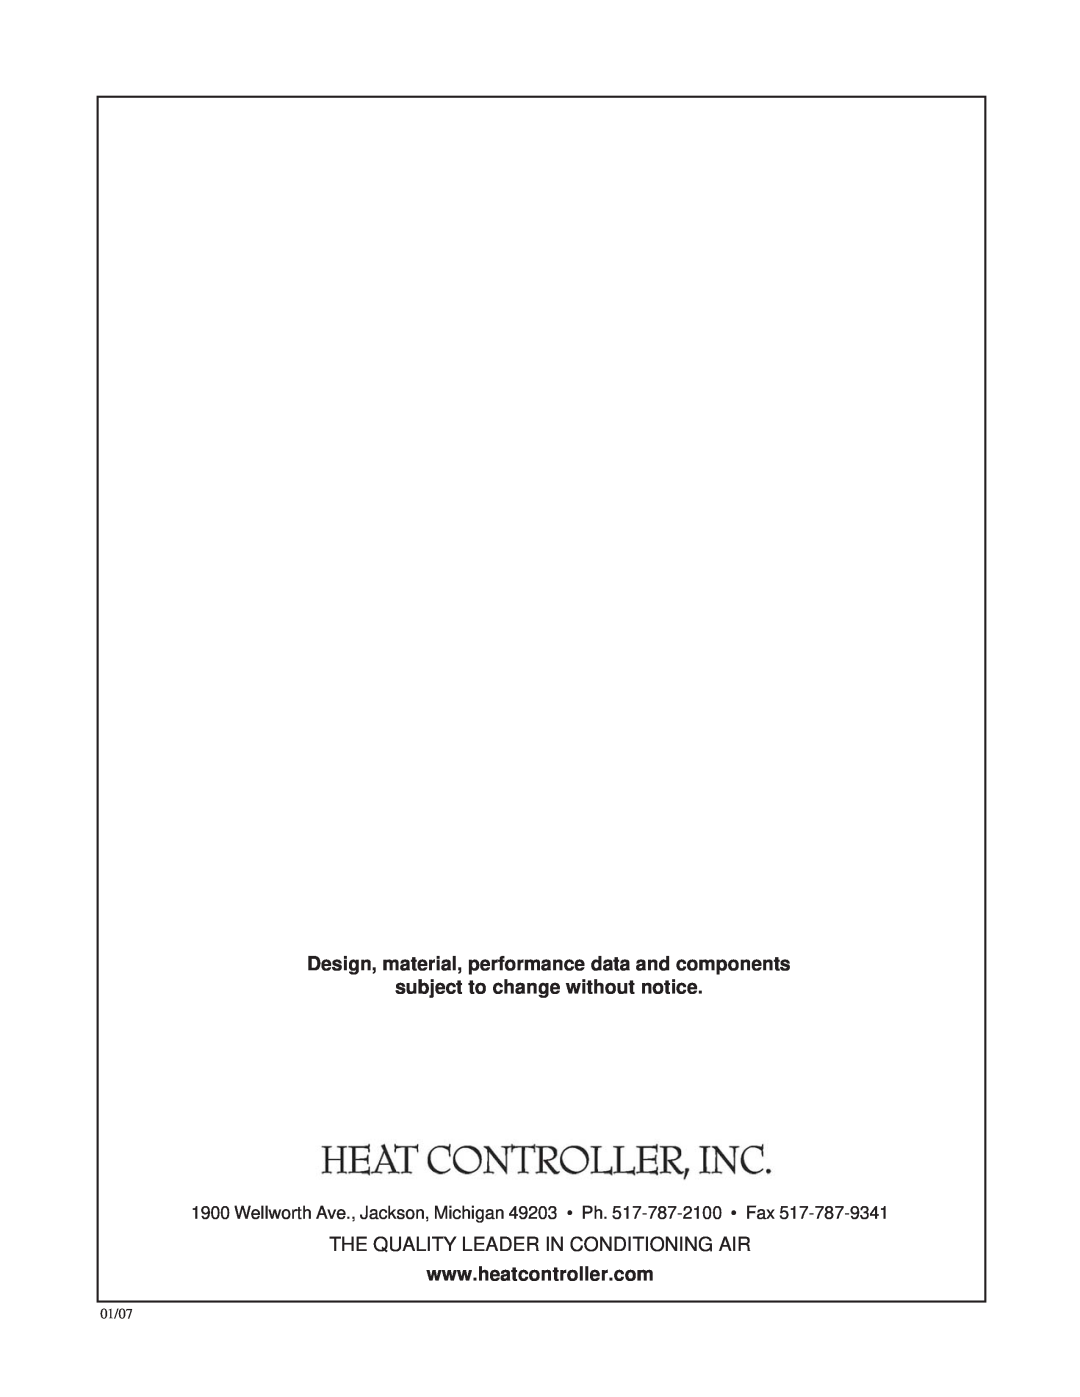 Heat Controller PE-91A PE-121A Design, material, performance data and components, subject to change without notice, 01/07 